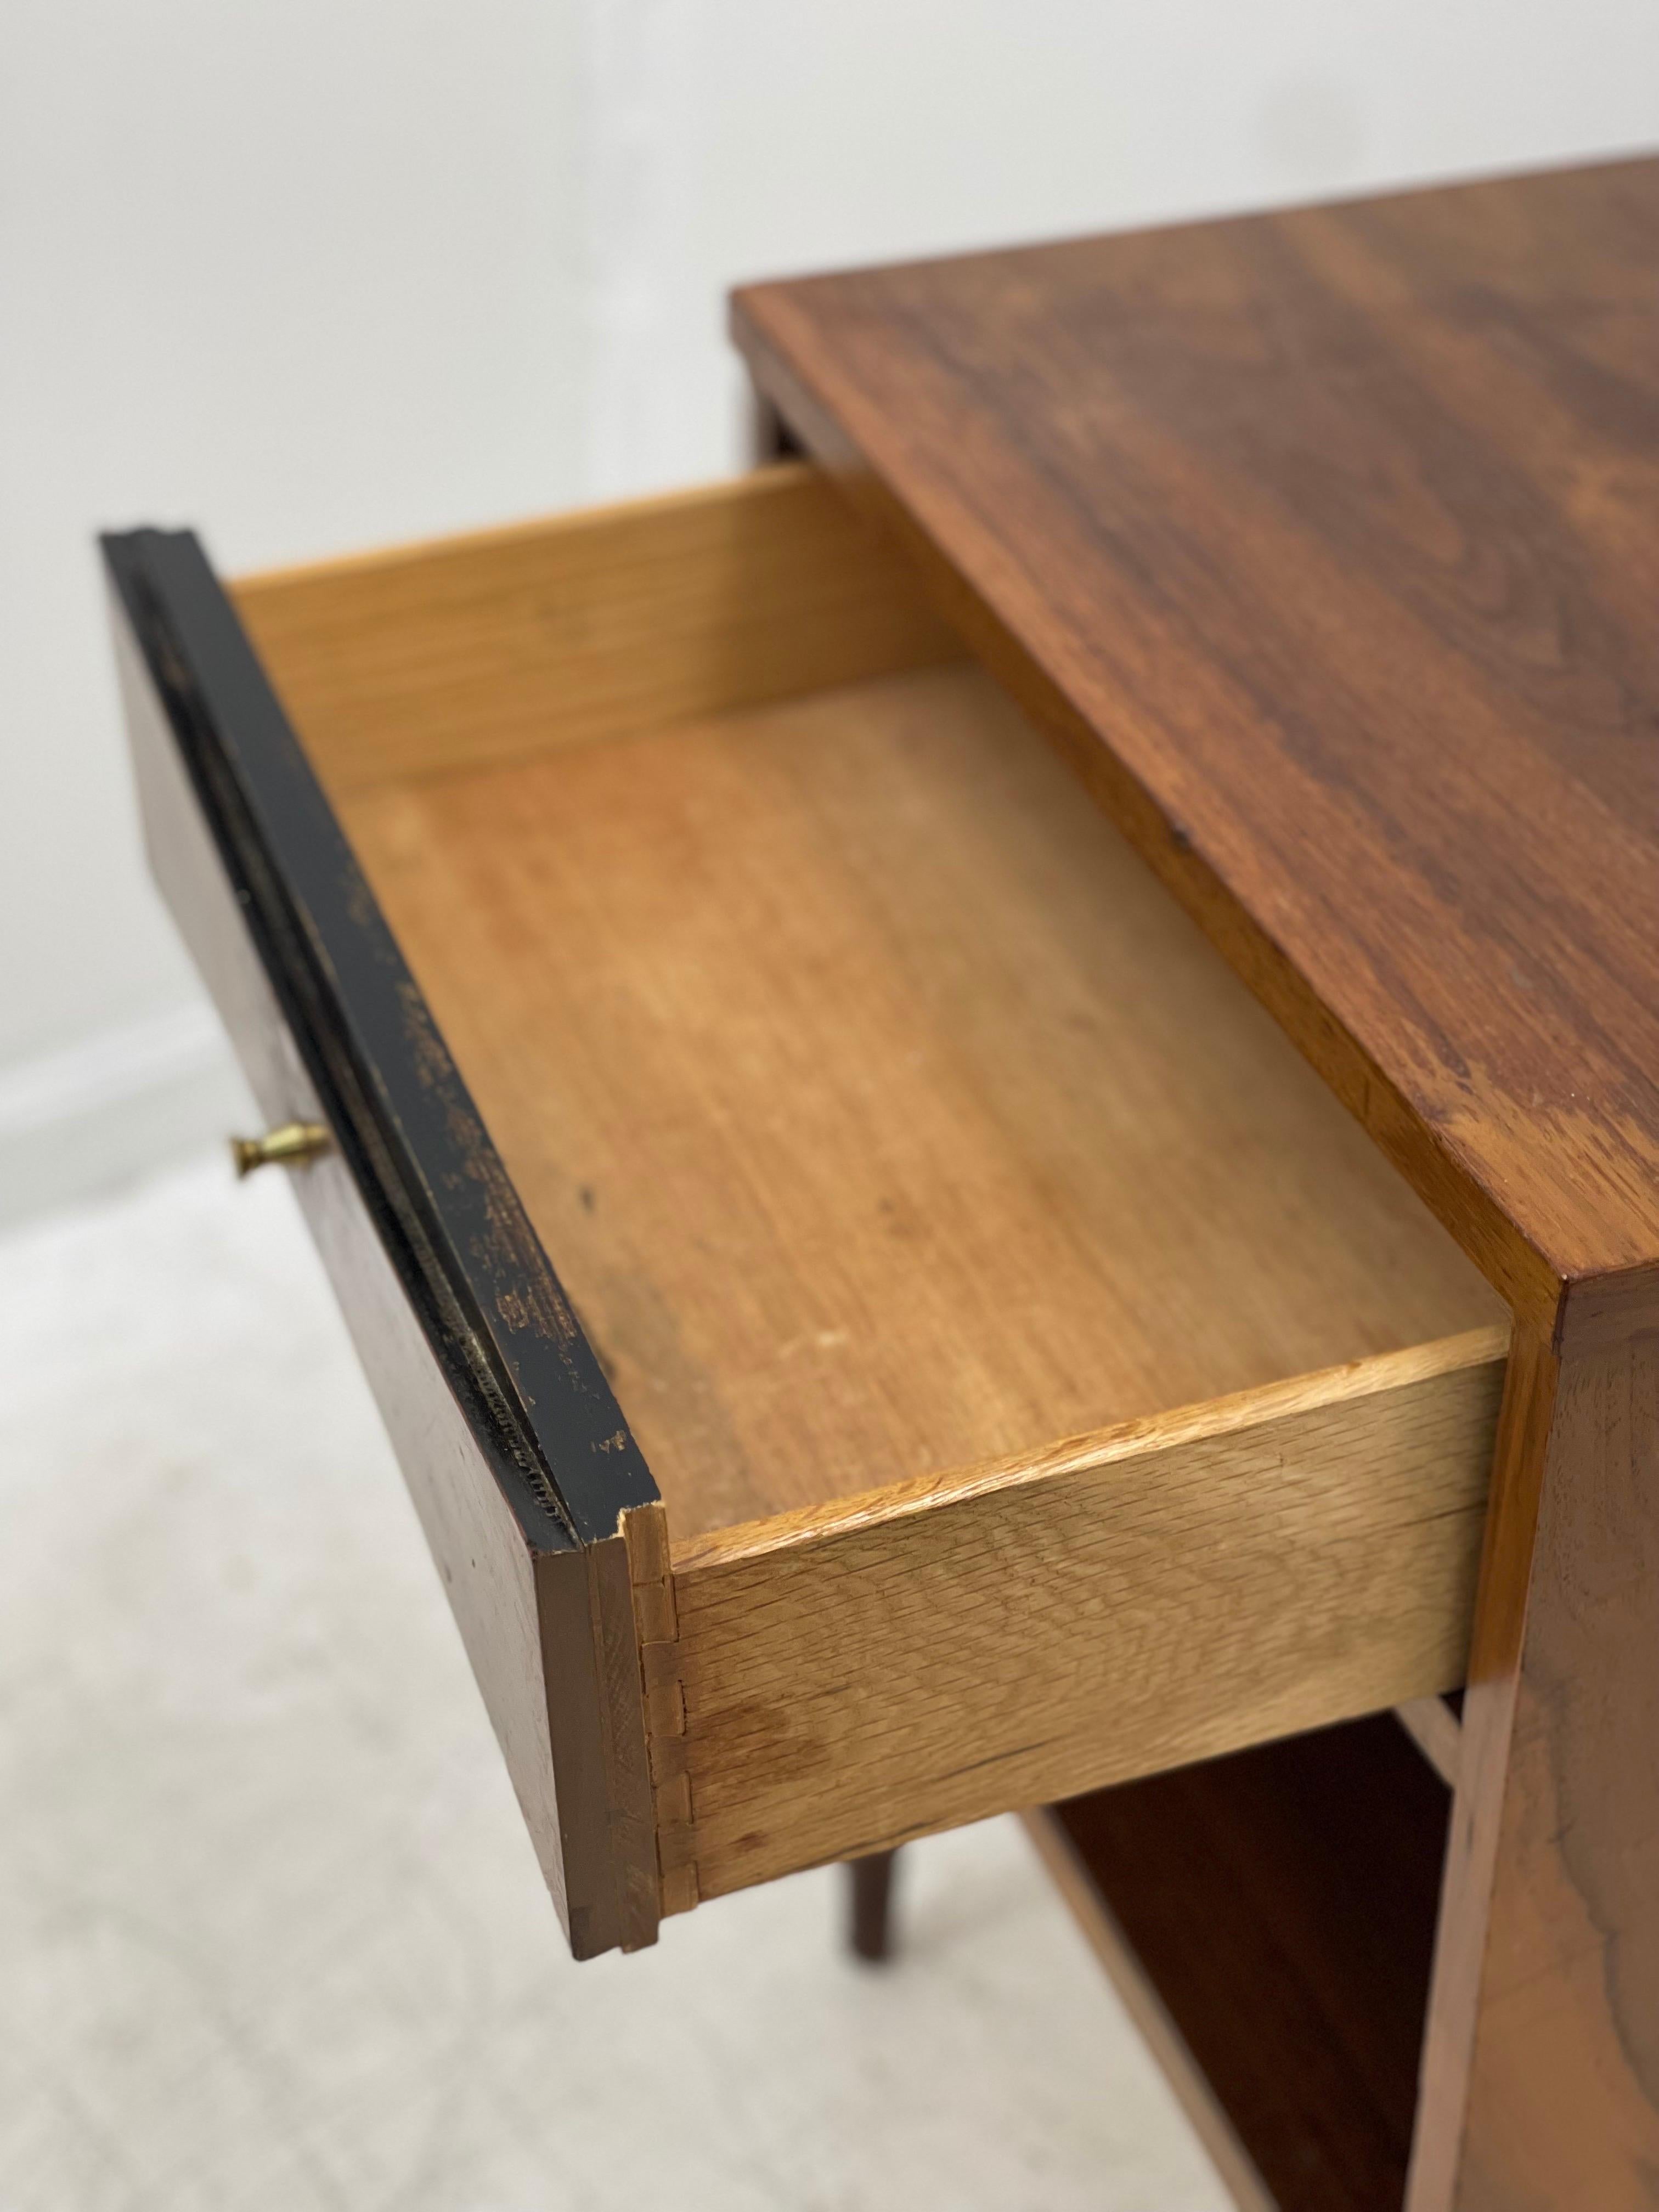 Late 20th Century Vintage Mid-Century Modern End Table Dovetail Drawer For Sale